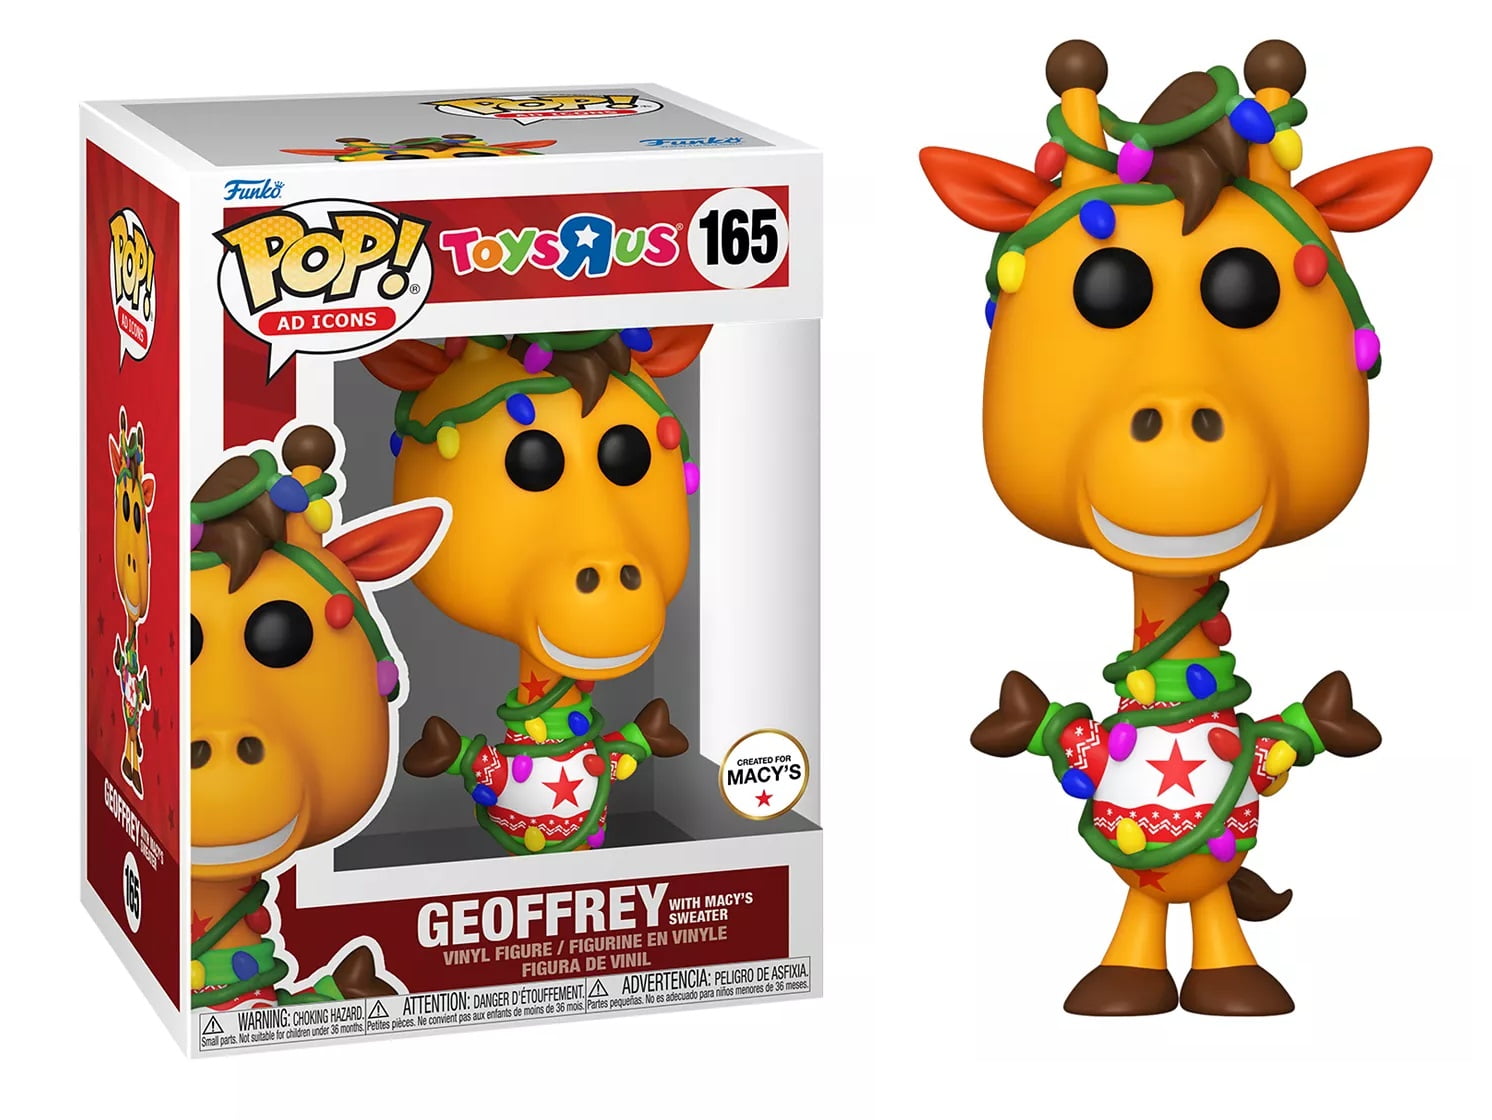 Funko POP! Ad Icons Toys R Us Geoffrey with Sweater #165 Macy's Exclusive - Walmart.com